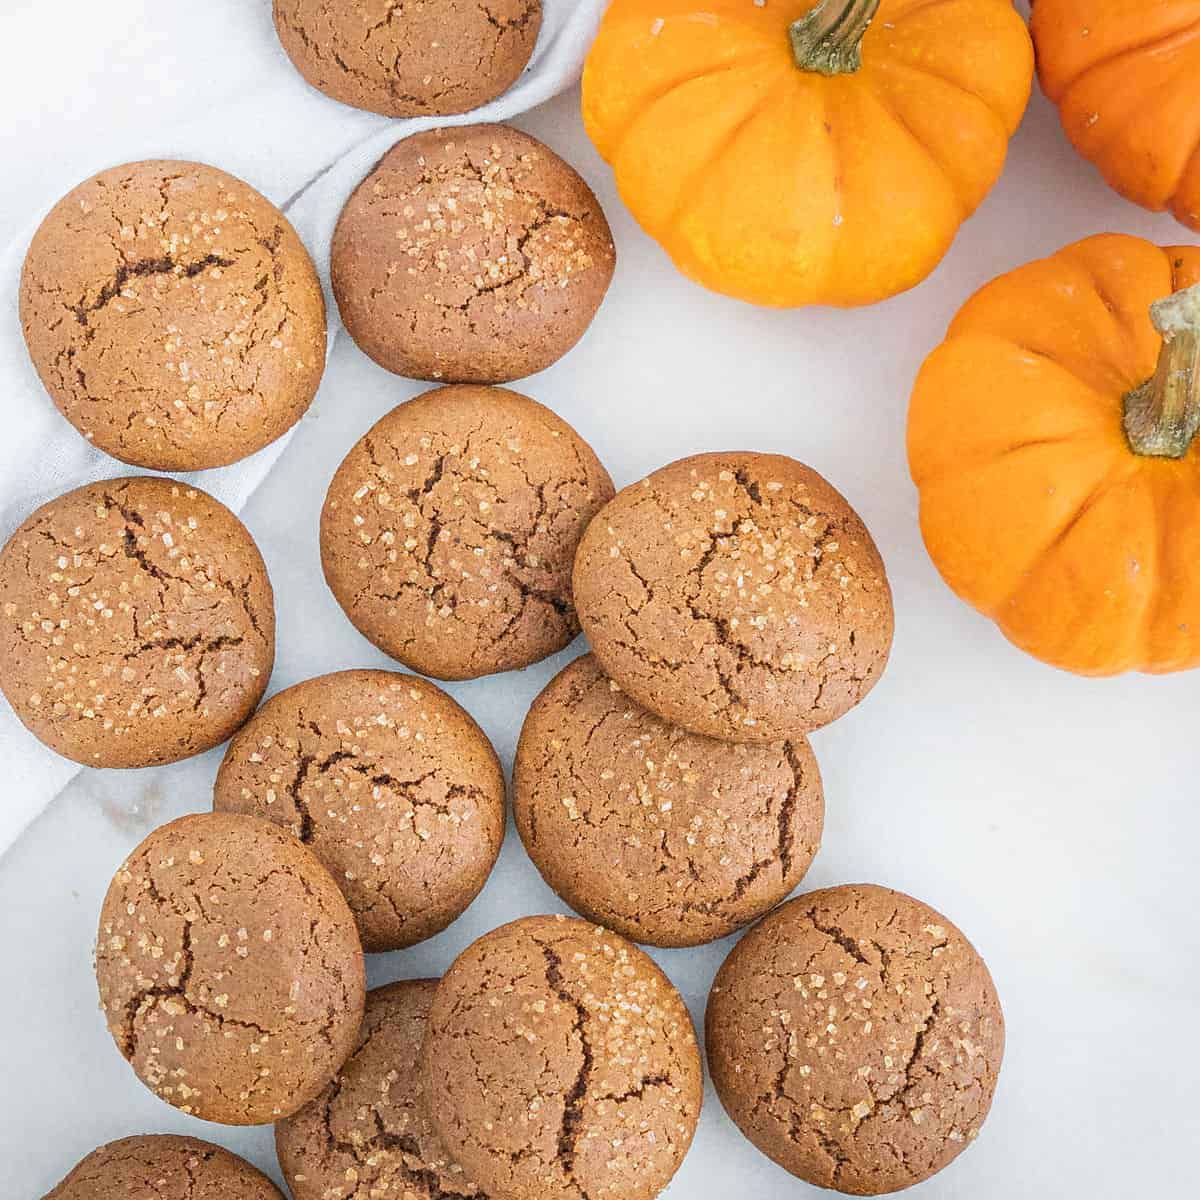 several pumpkin molasses cookies with pumpkin in the background against a white surface